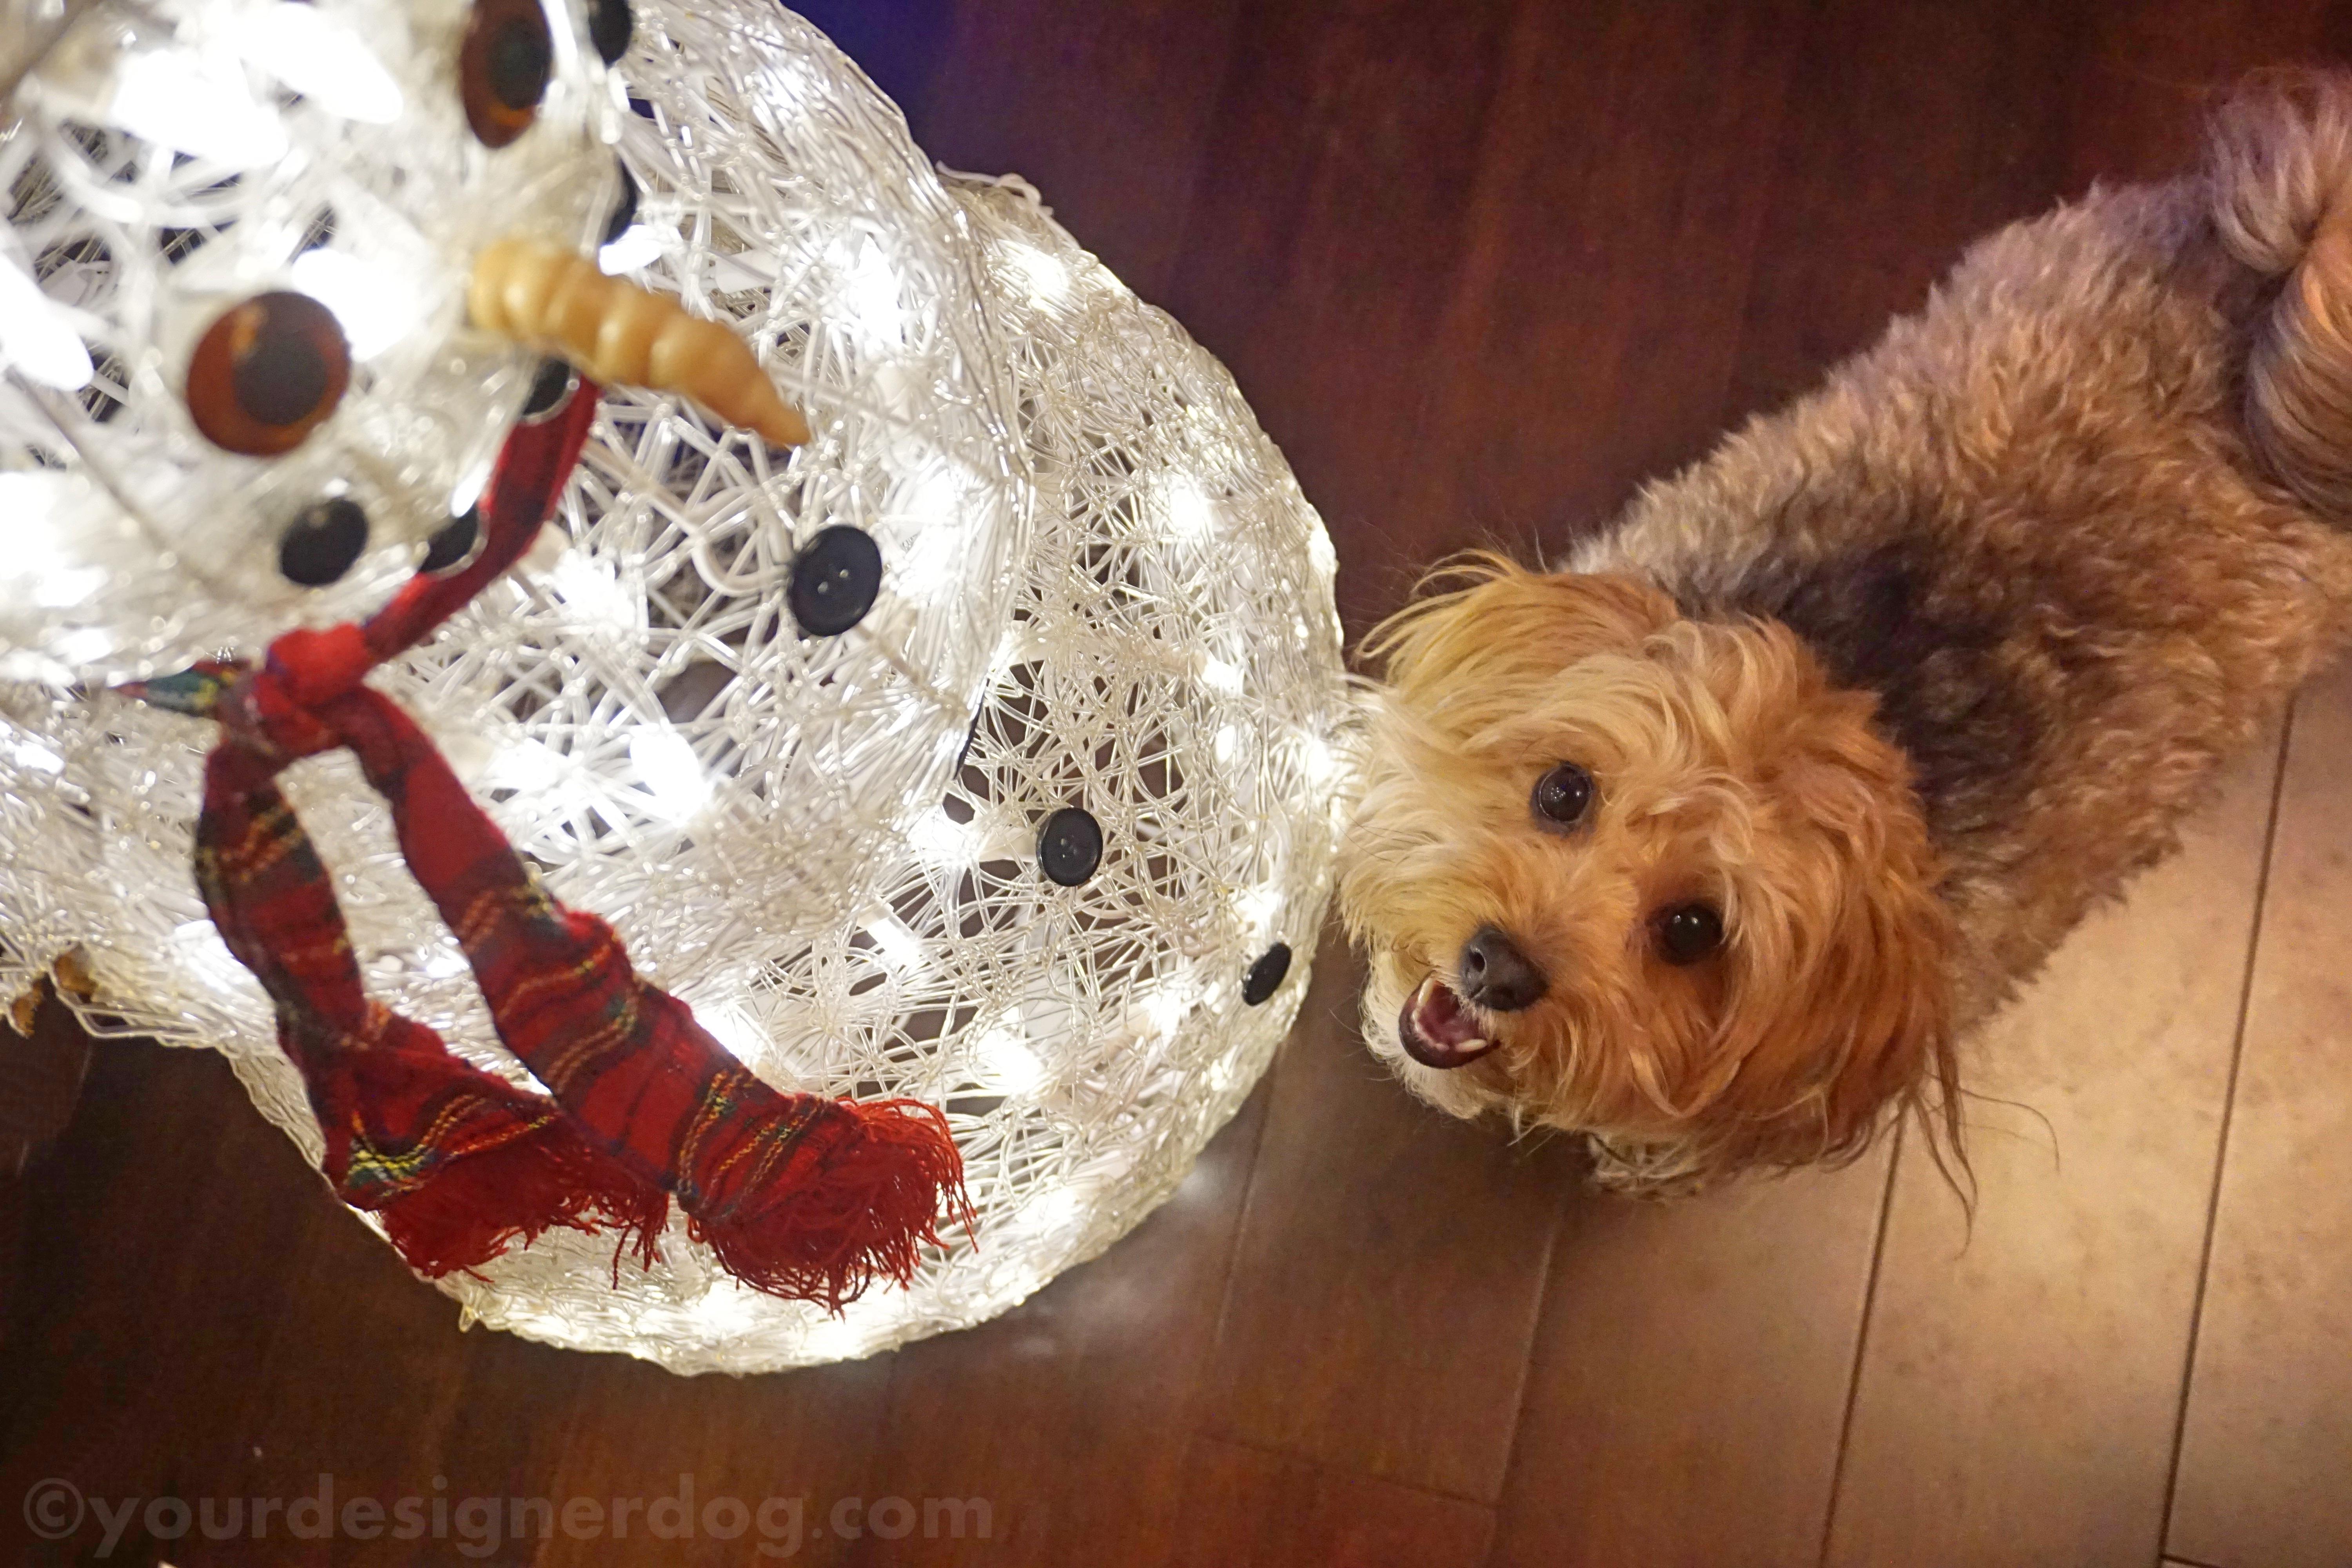 dogs, designer dogs, yorkipoo, yorkie poo, snowman, LED lights, winter, holiday decorations, dog smiling